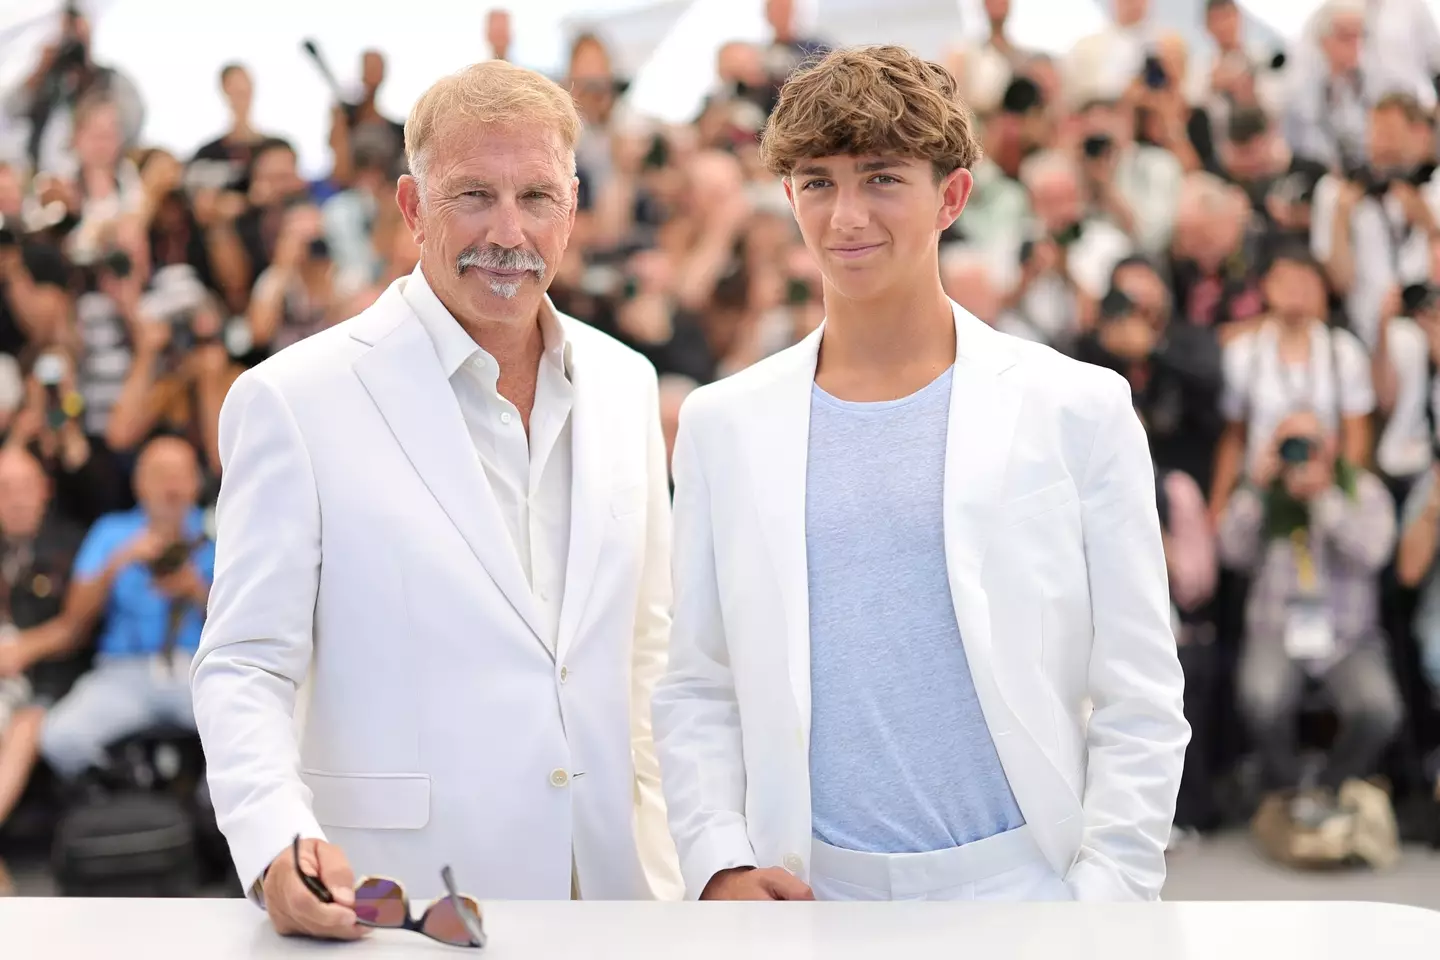 Kevin Costner has defended his decision to cast his son in his new movie. (Neilson Barnard/Getty Images)